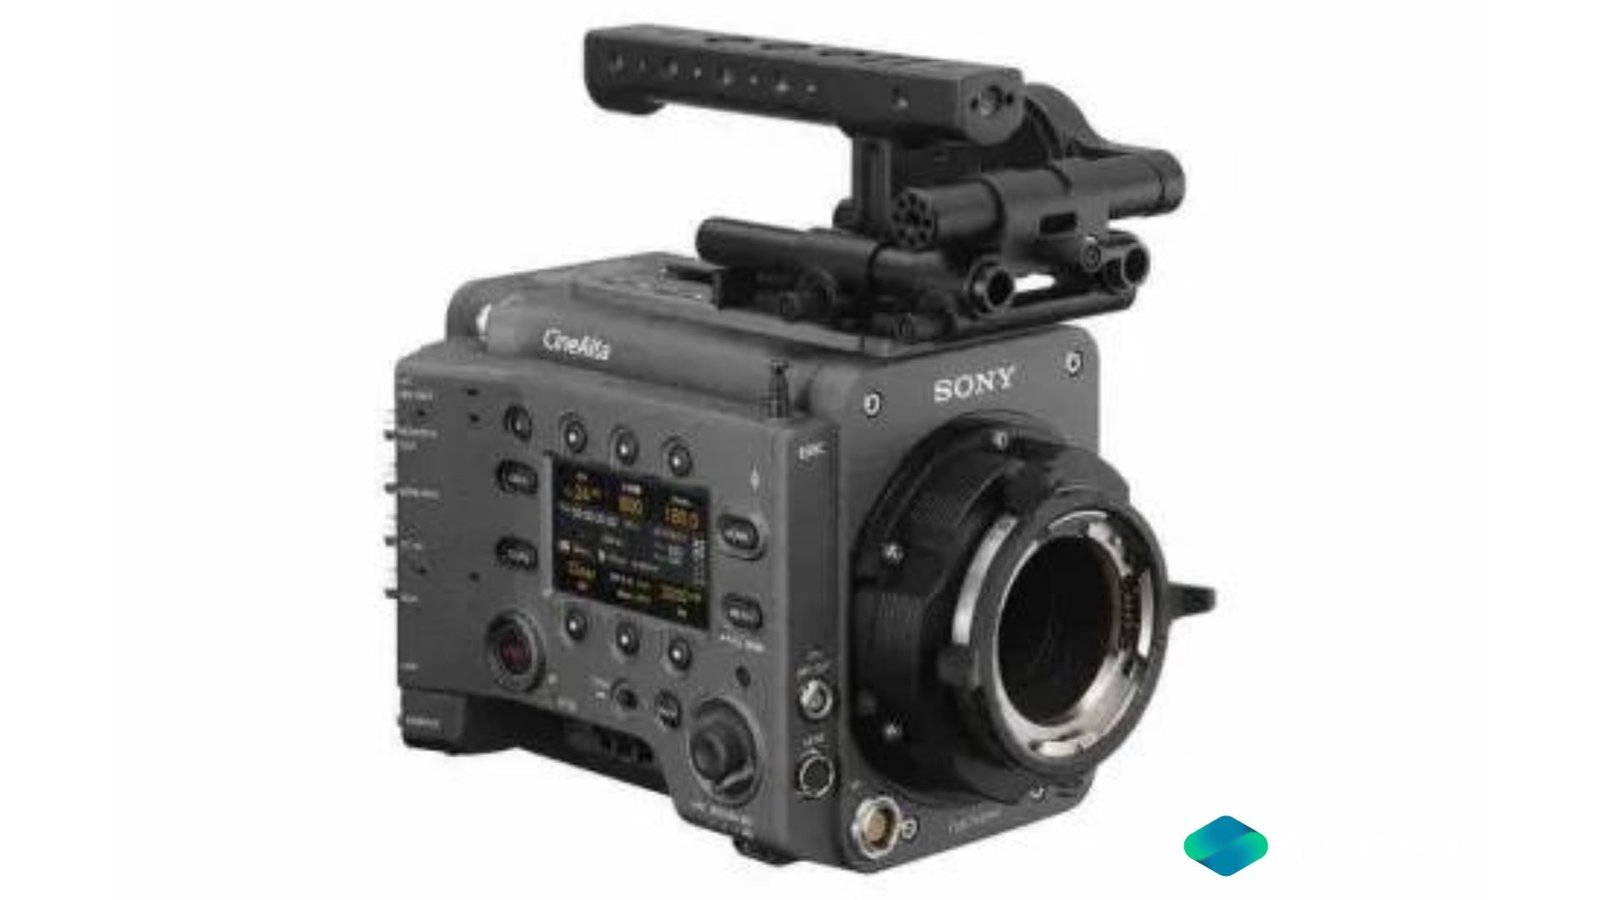 Rent Sony VENICE 2 8K Digital Motion Picture Camera in Delhi NCR, Camera lenses for rent, Camera accessories, in Delhi Gurgaon Noida, hire Shooting equipment, Lighting equipment rental, Film gear rental for Video production, camera rental company in Delhi, film equipment rental company